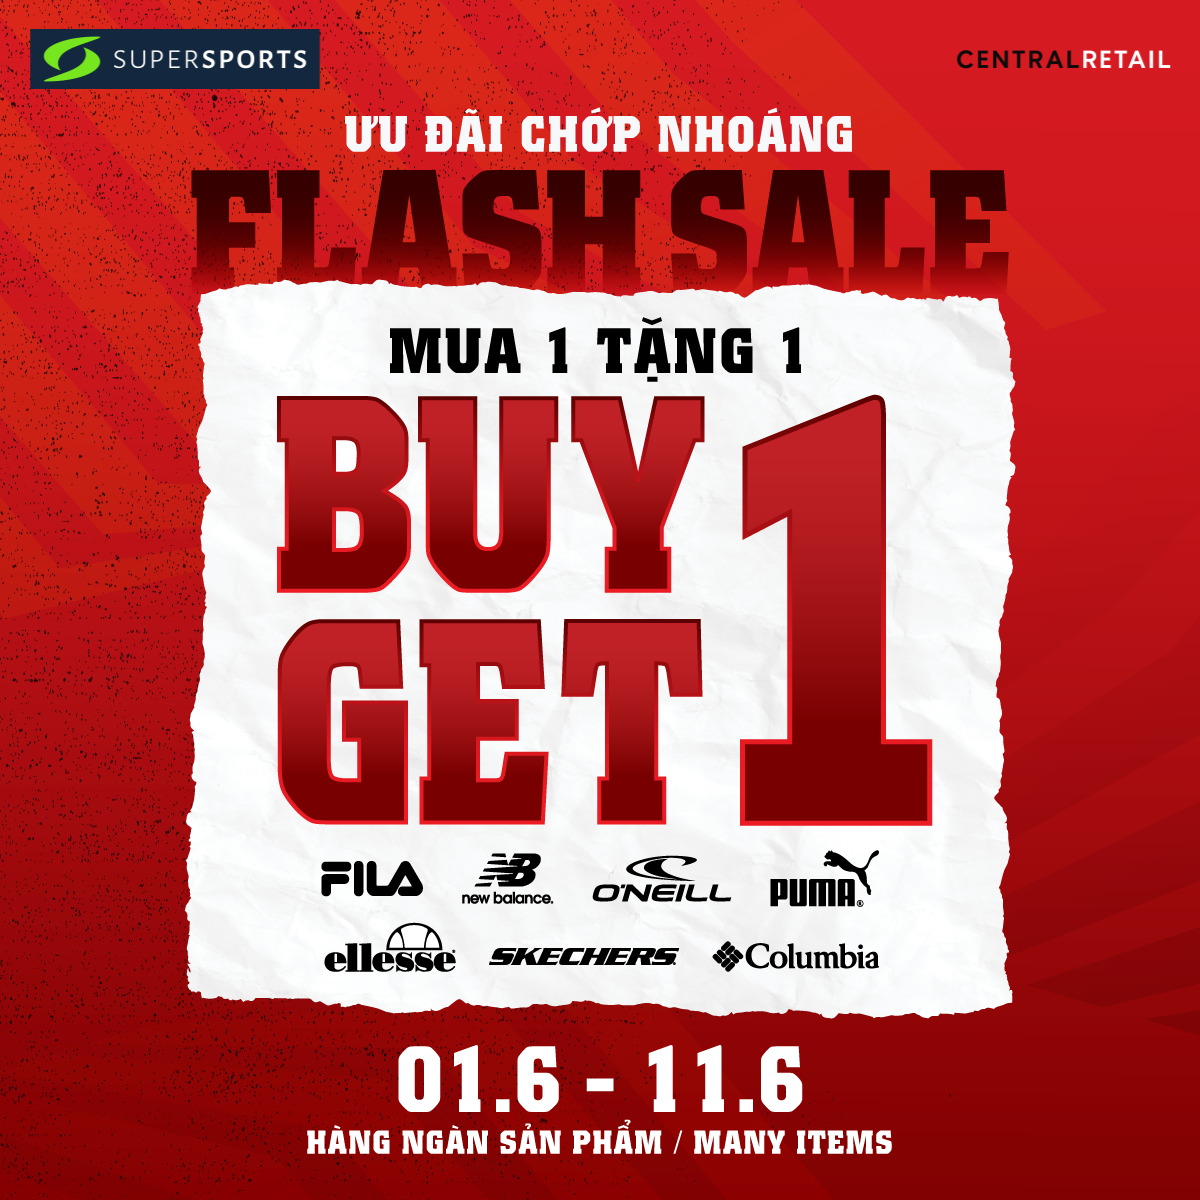 DOUBLE OFFER - BUY 1 GET 1 FREE AT SUPERSPORTS